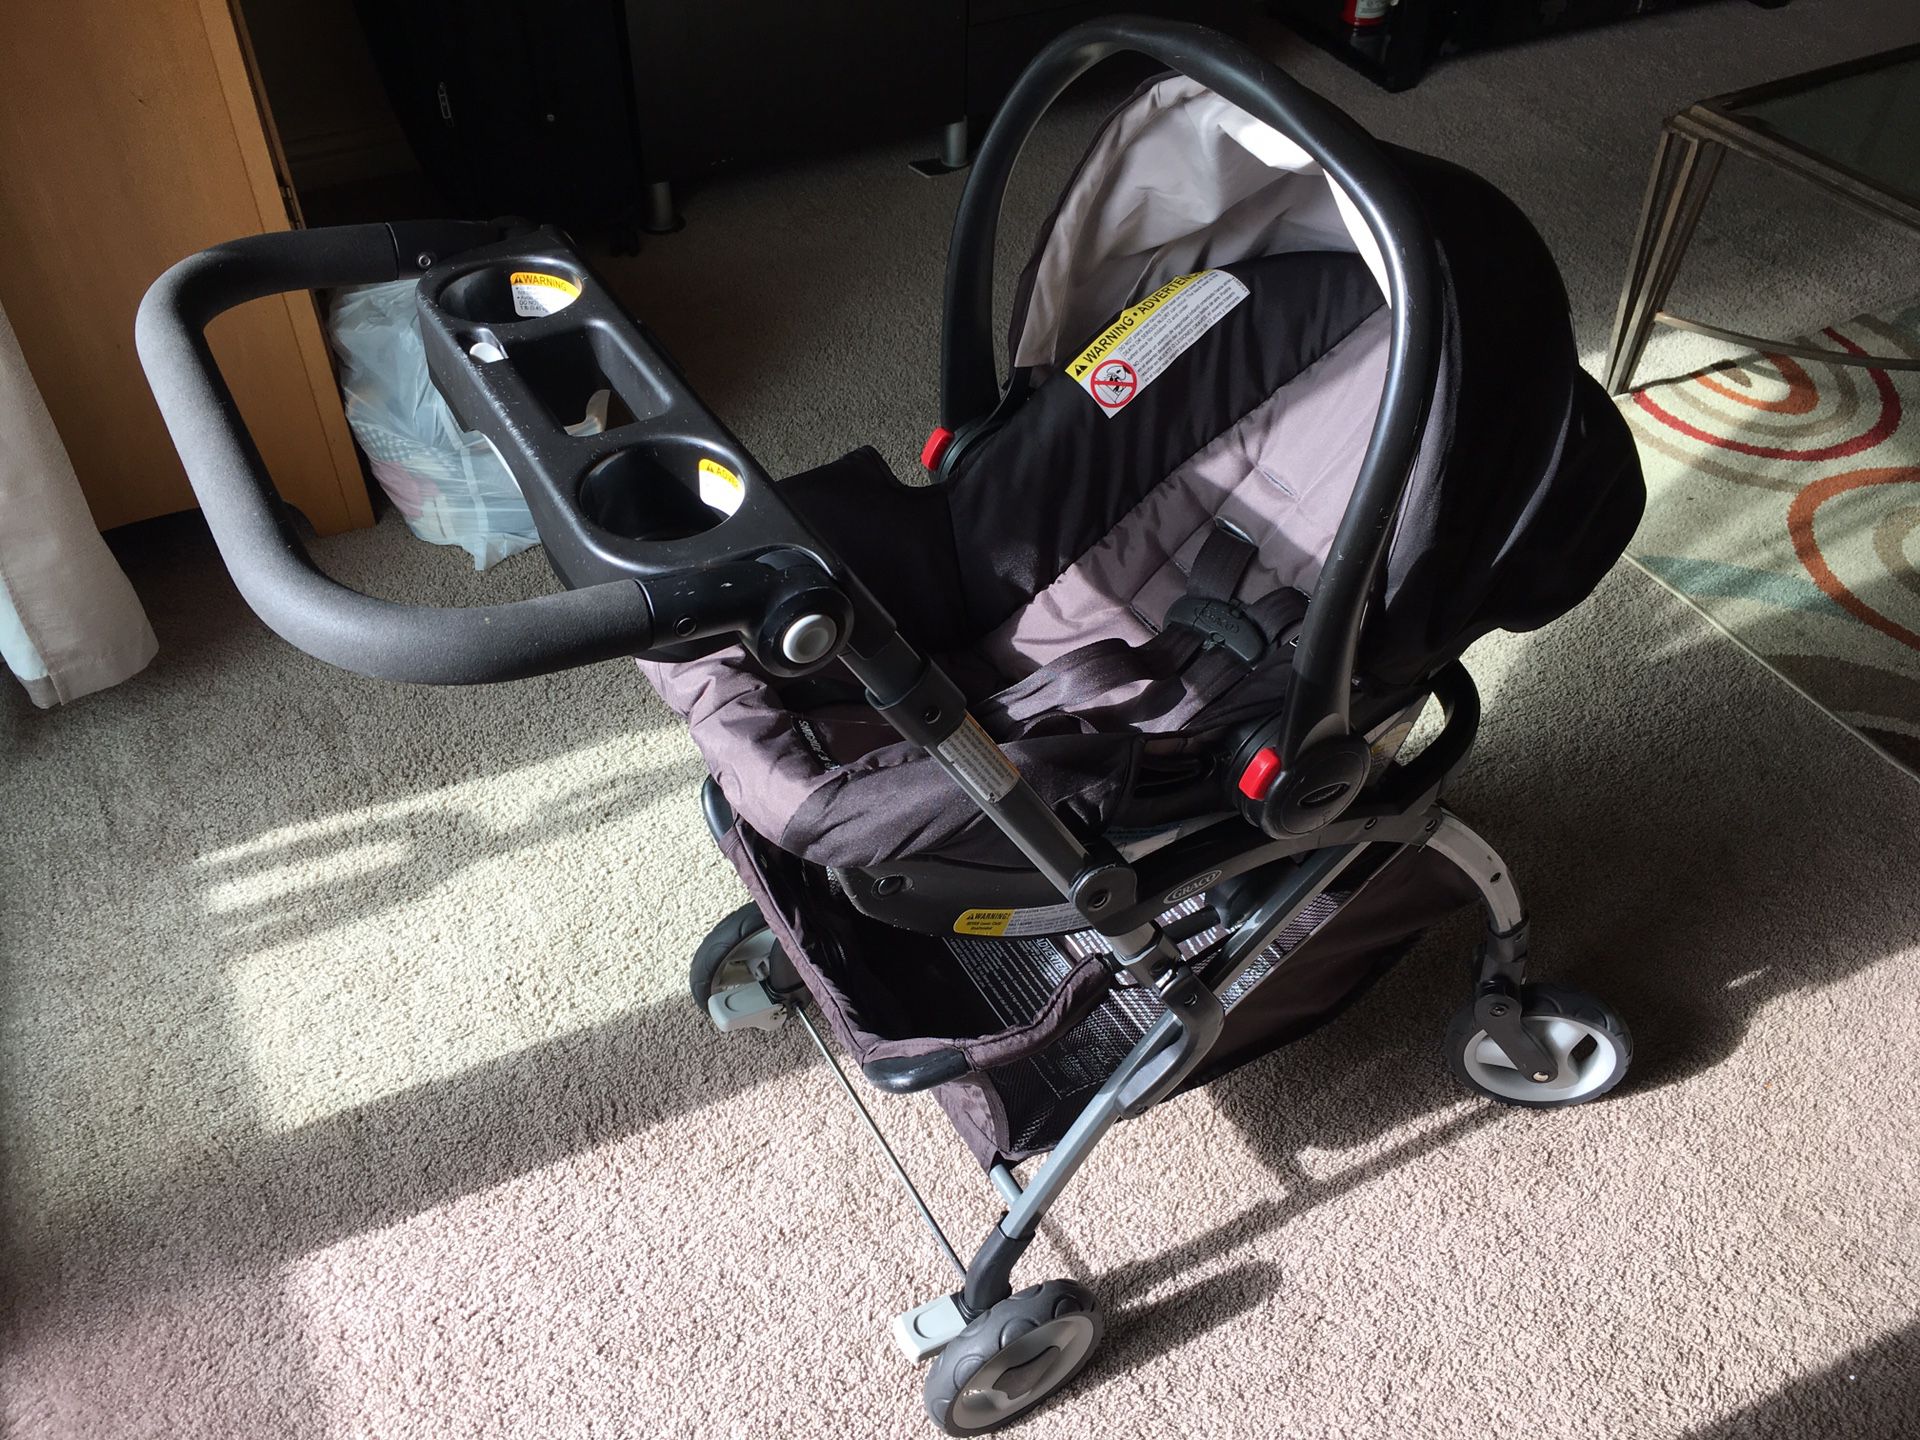 Graco SNUG FIT stroller frame and car seat.